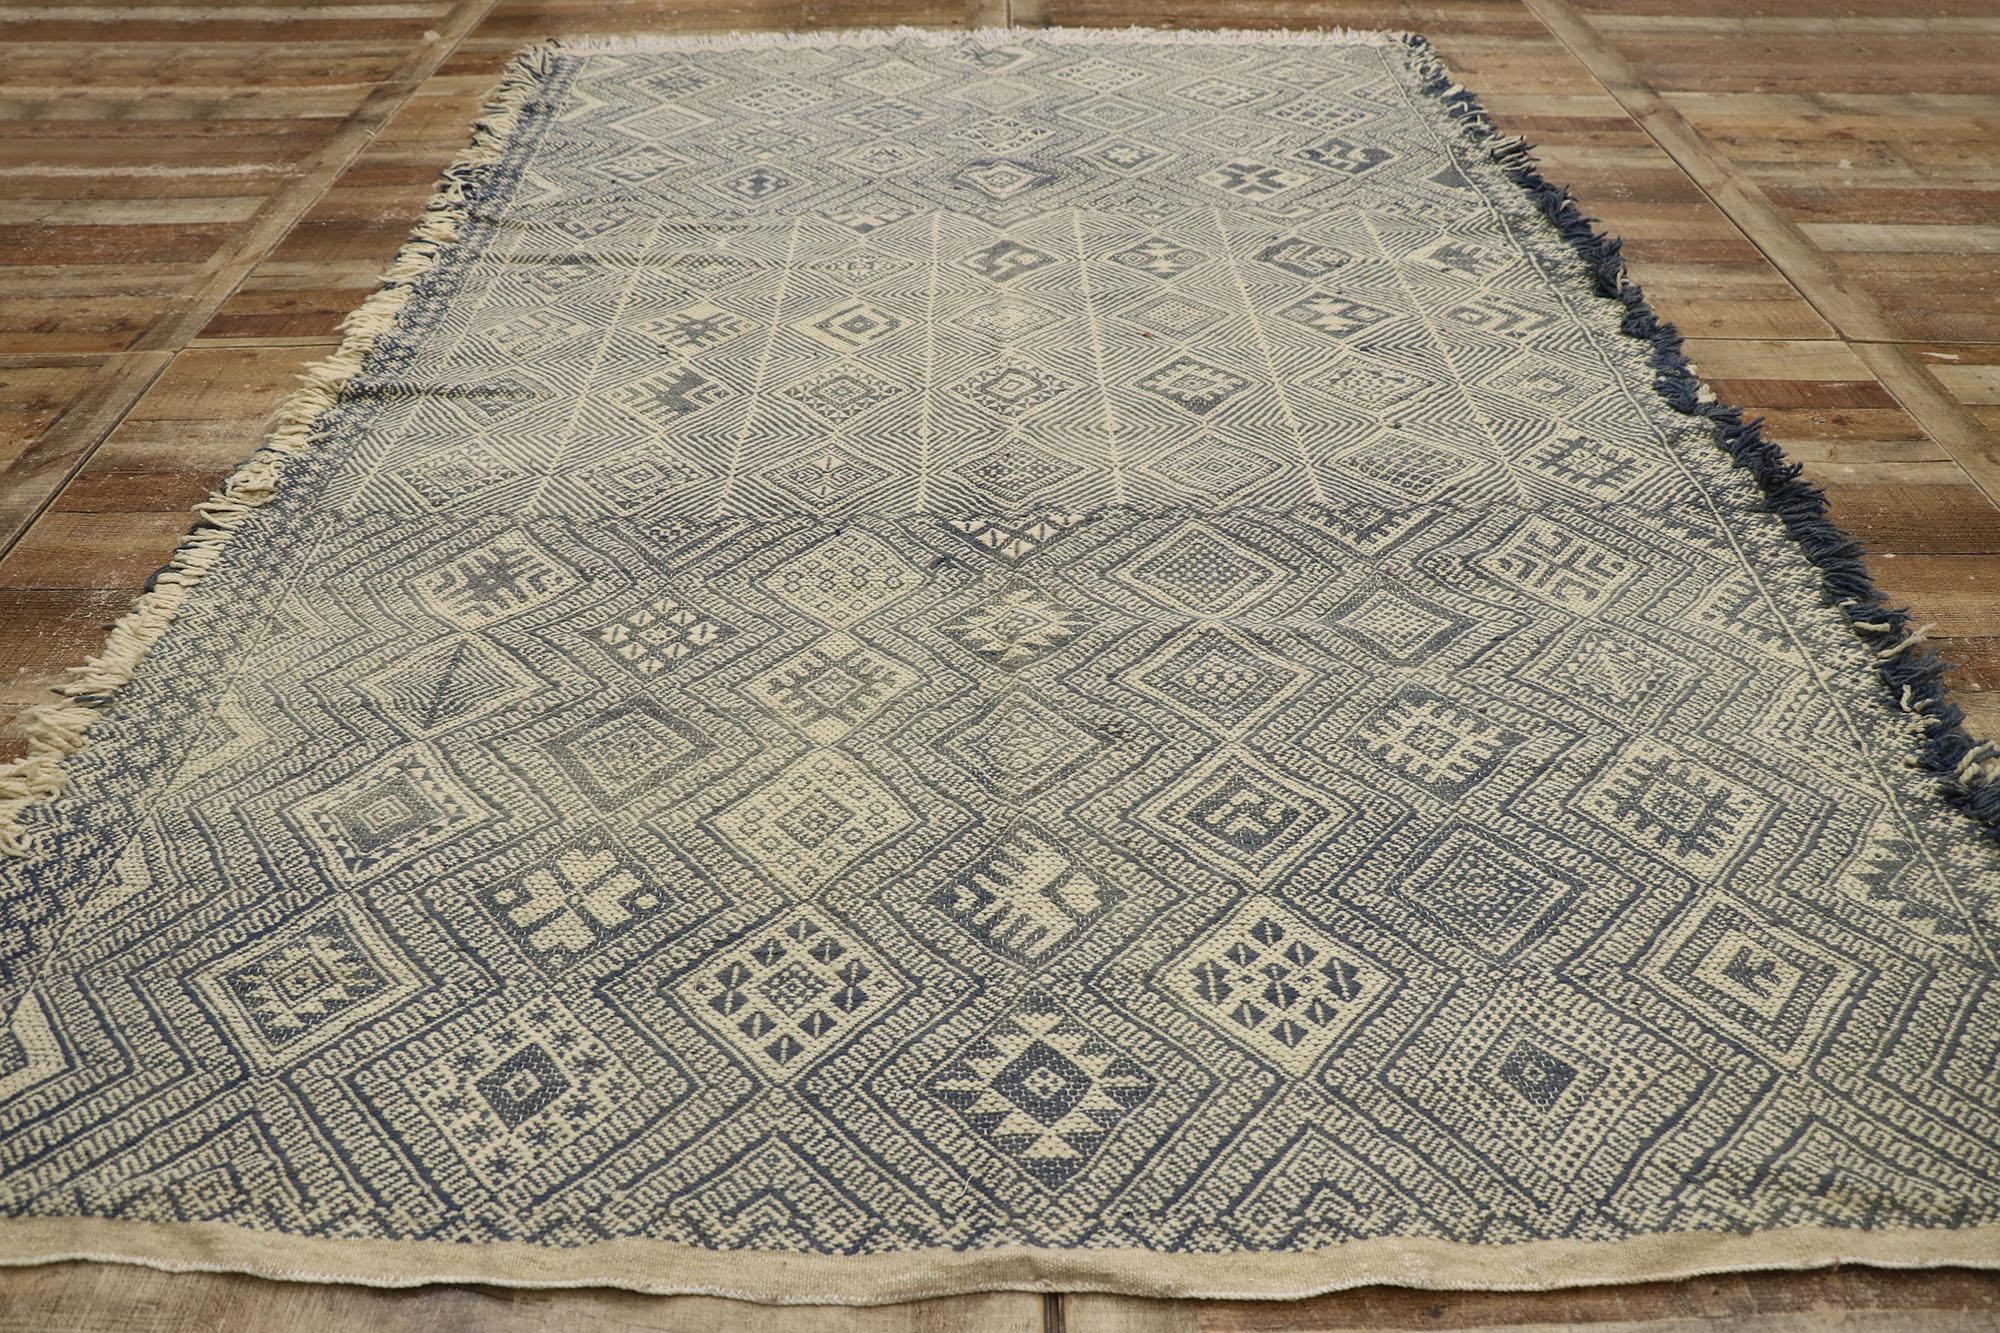 Wool Vintage Zemmour Moroccan Kilim Rug with Boho Chic Tribal Style For Sale